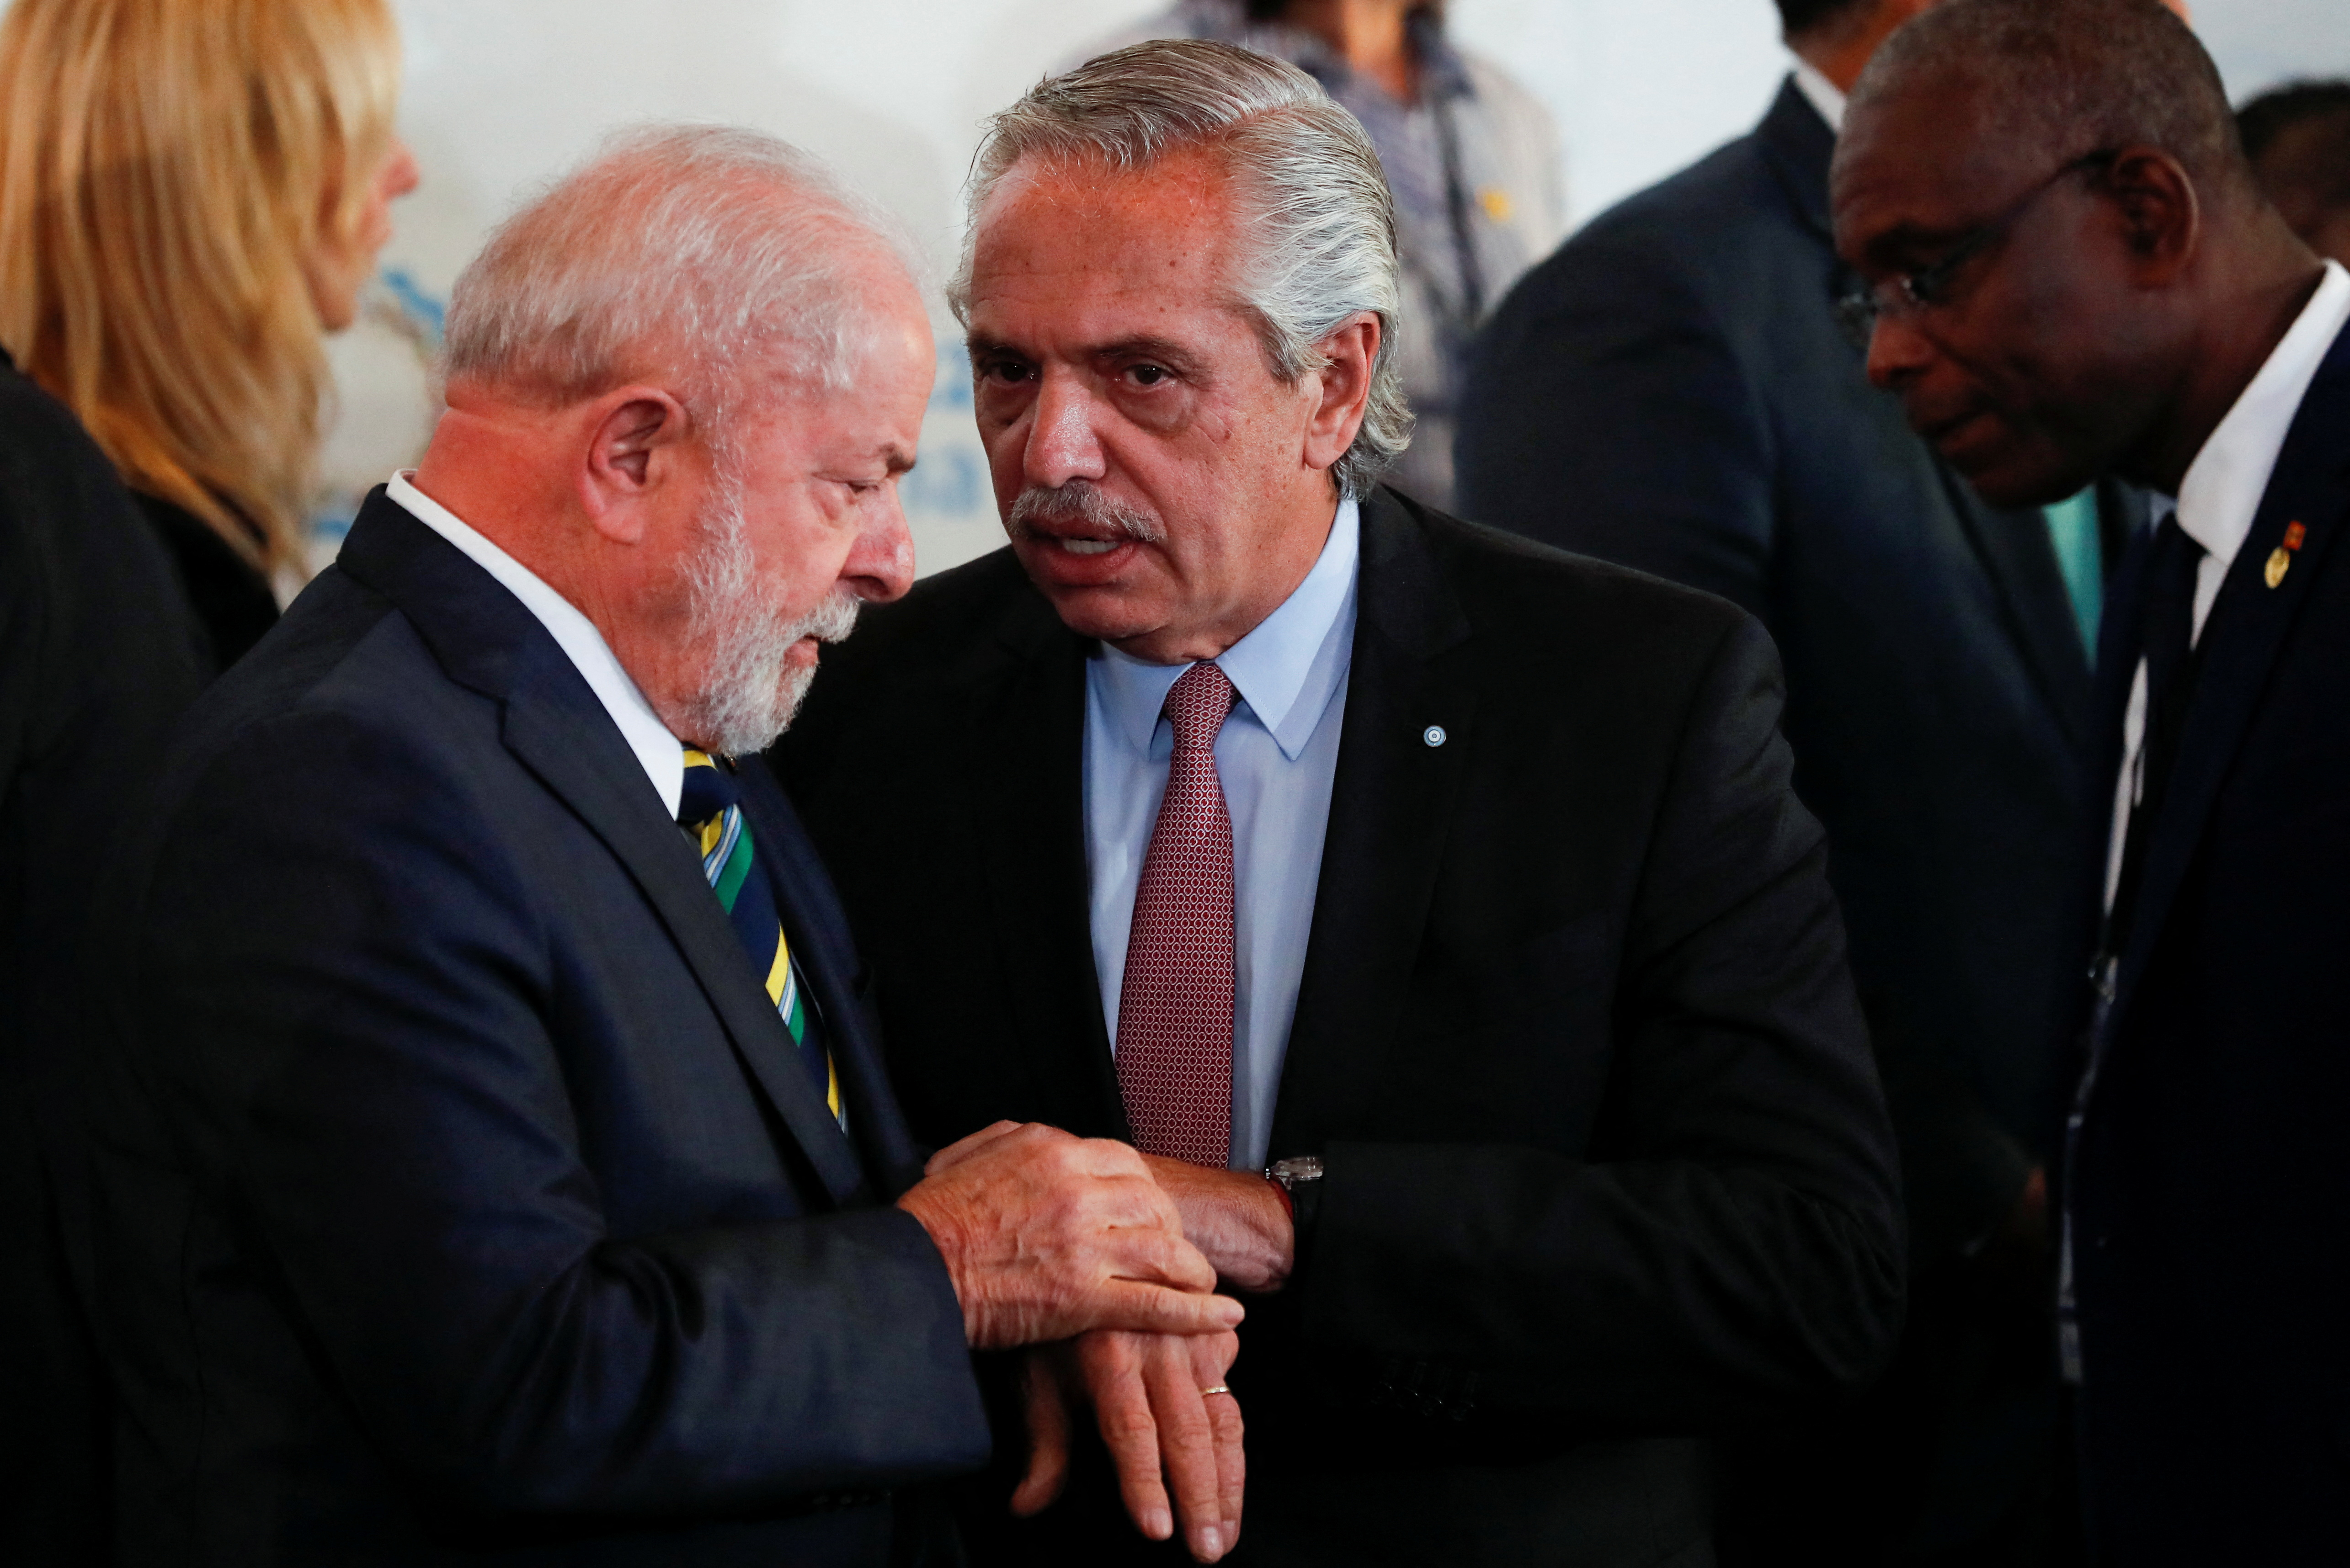 Brazil's President Luiz Inacio Lula da Silva and Argentina's President Alberto Fernandez talk as they stand for a family photo during the 7th Heads of State and Government Summit of the Community of Latin American and Caribbean States (CELAC) in Buenos Aires, Argentina, January 24, 2023. REUTERS/Agustin Marcarian